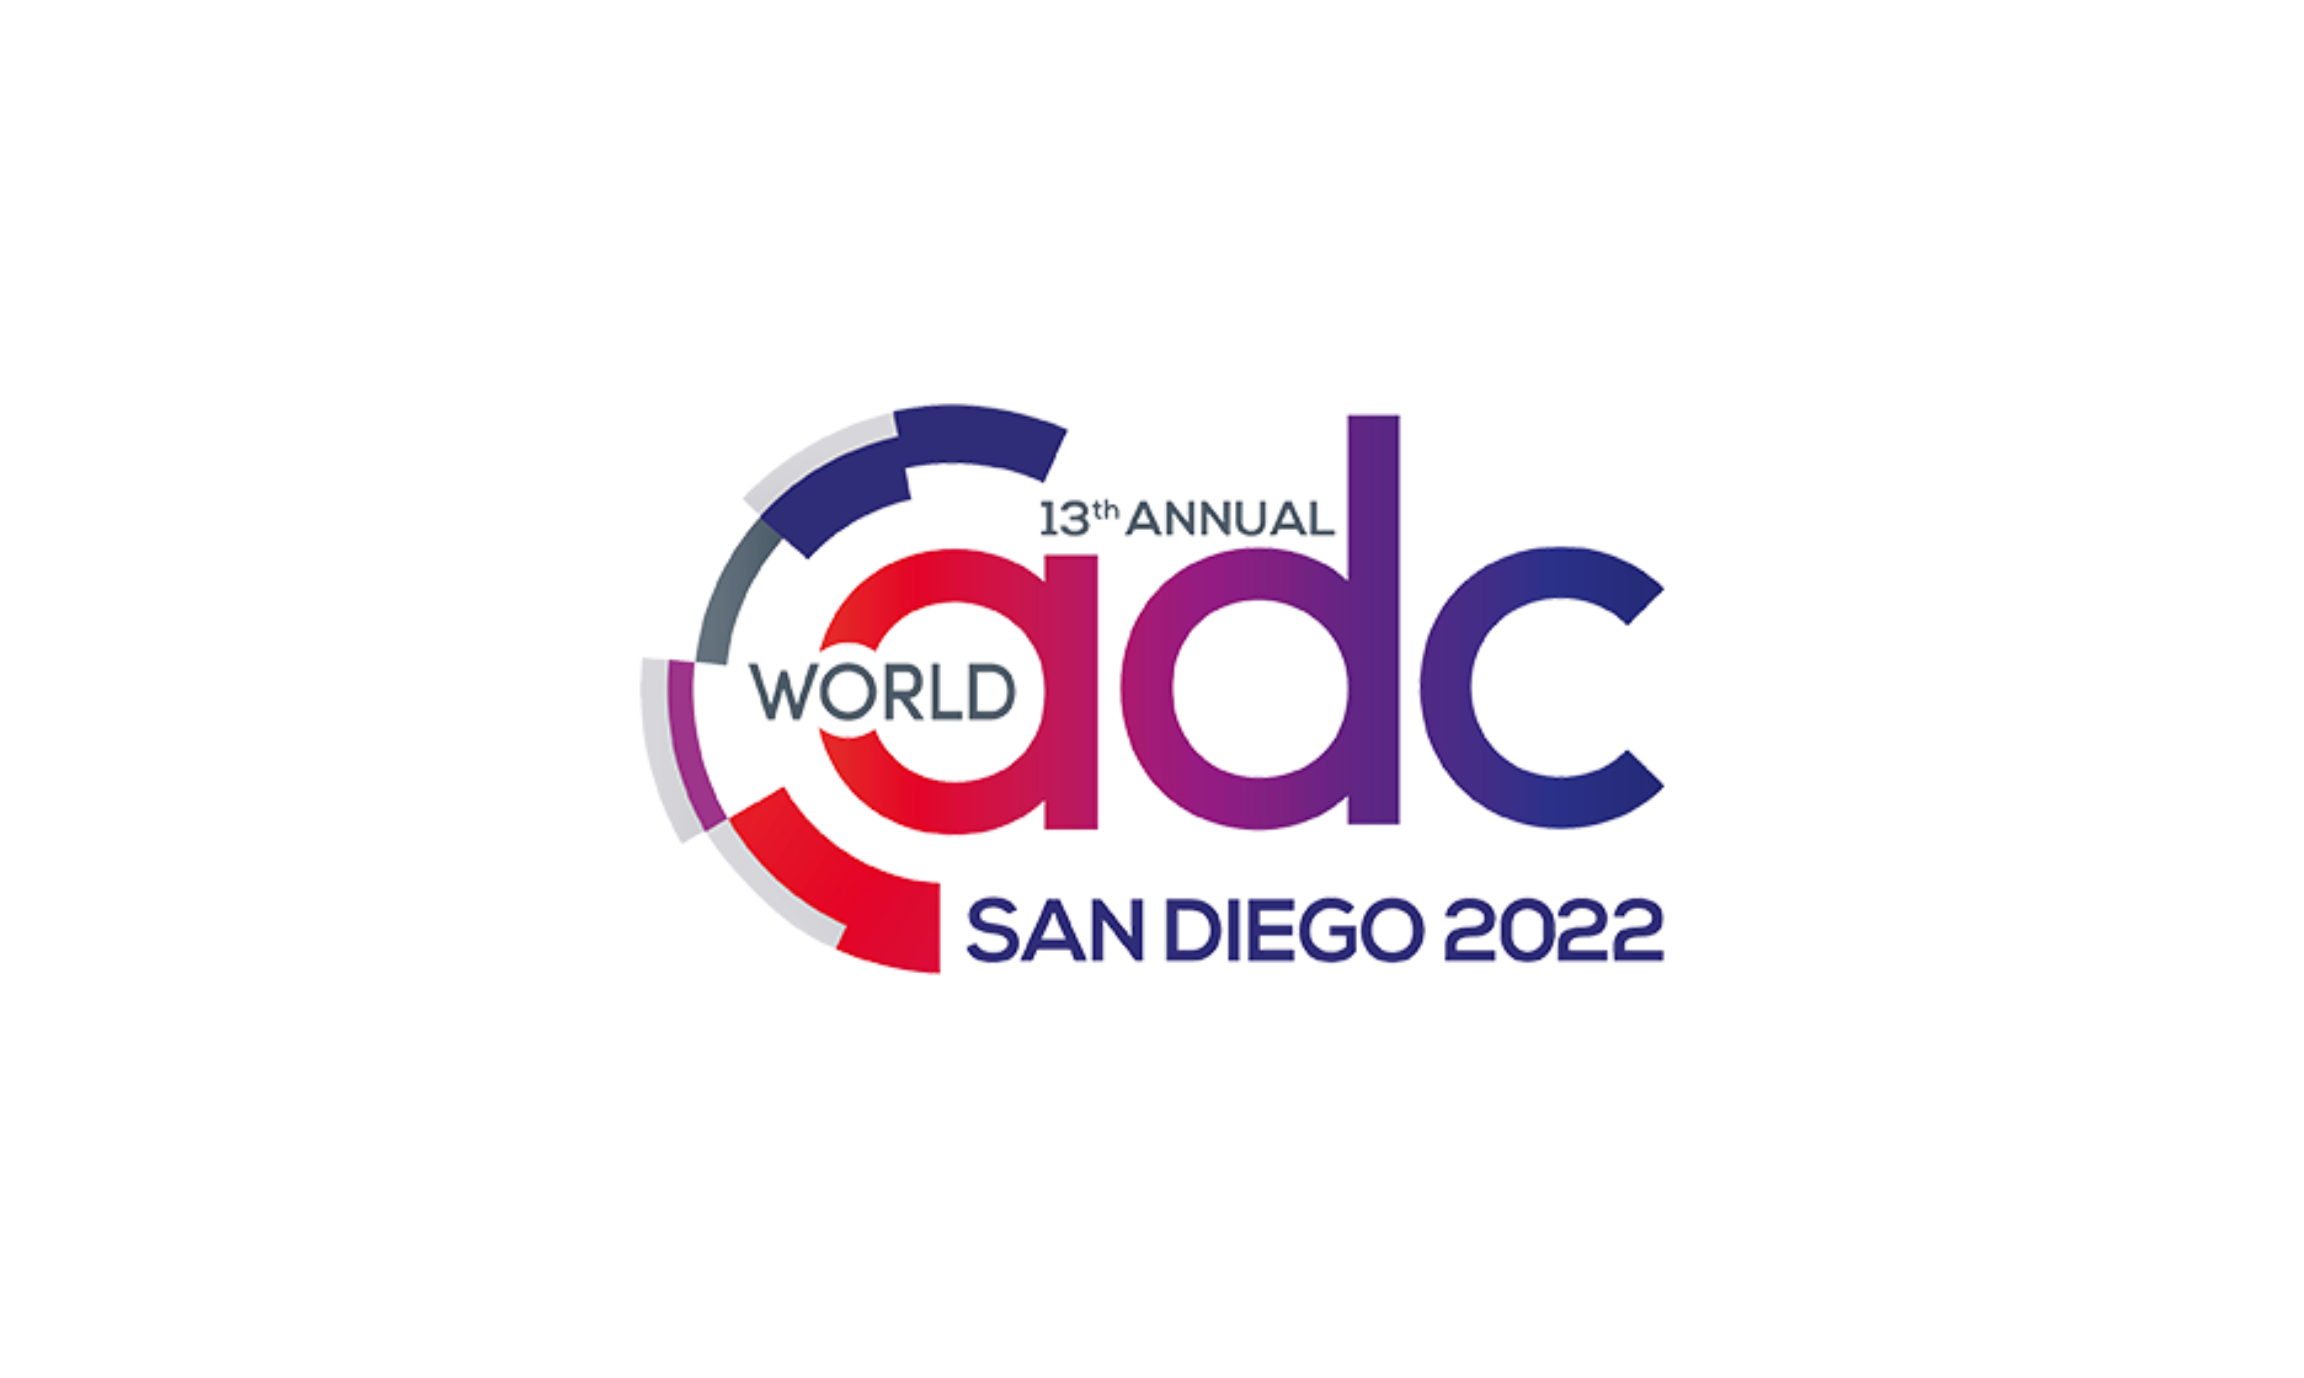 Biosion next generation ADC platform will be presented at World ADC San Diego 2022